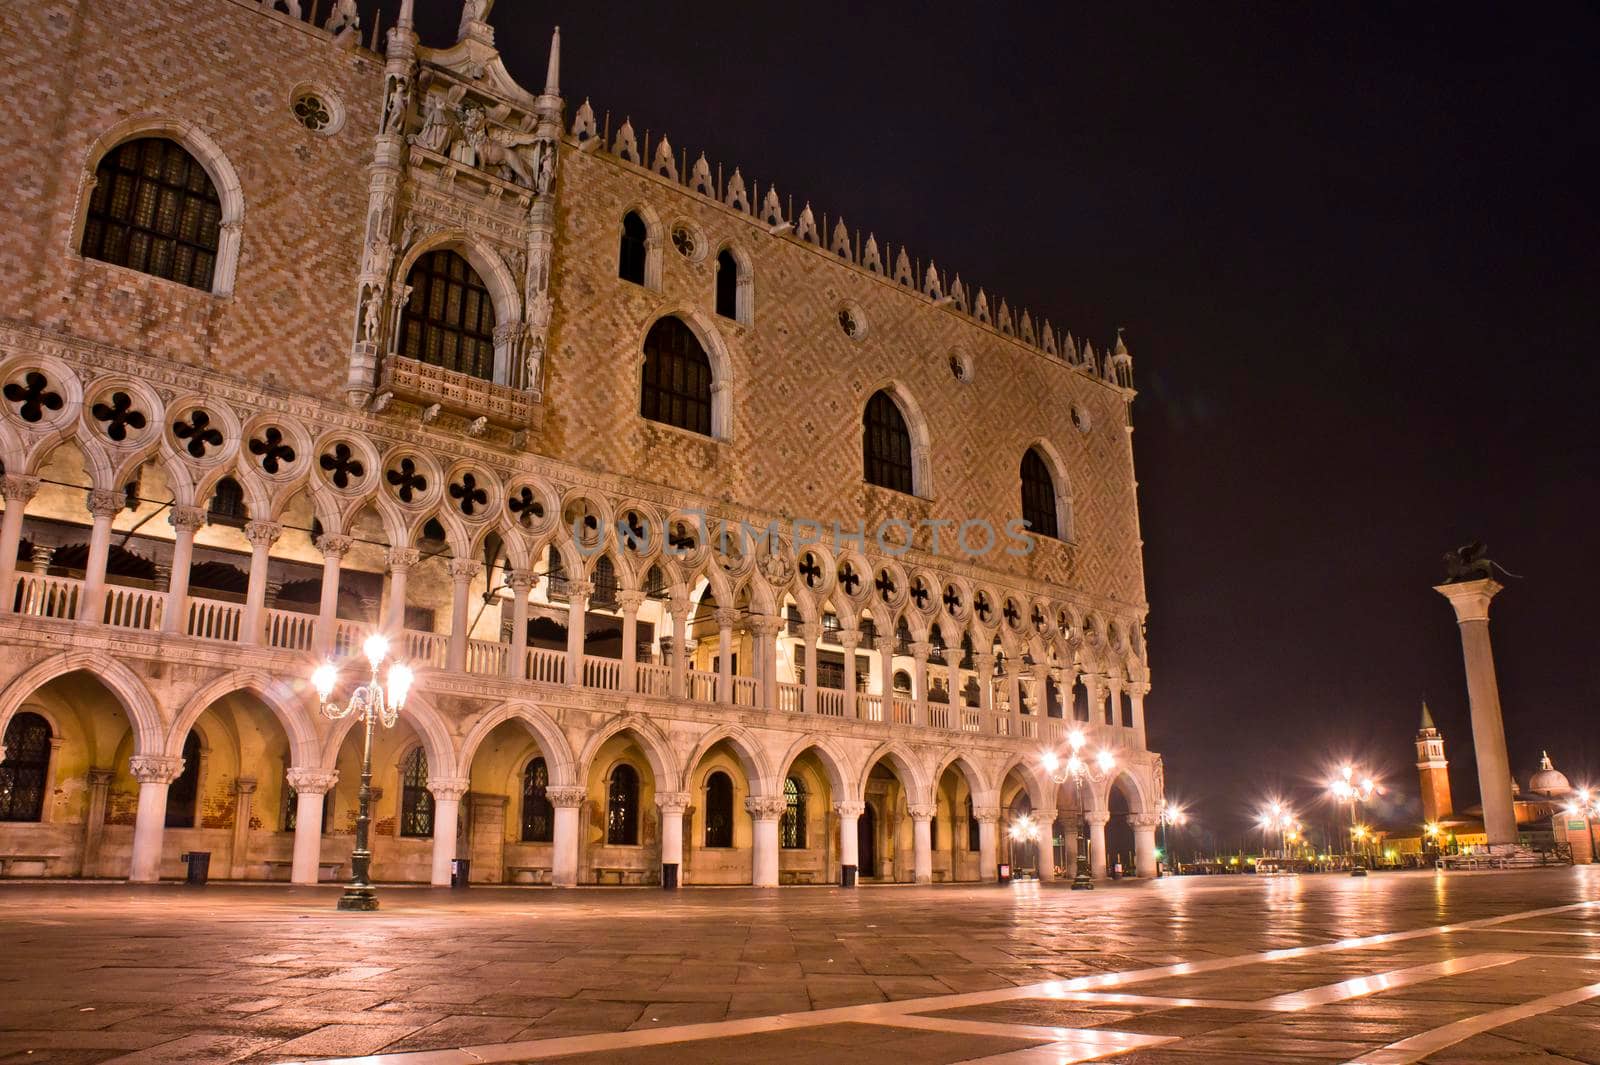 Venice, San Marco Square, Old city view by night, Italy, Europe